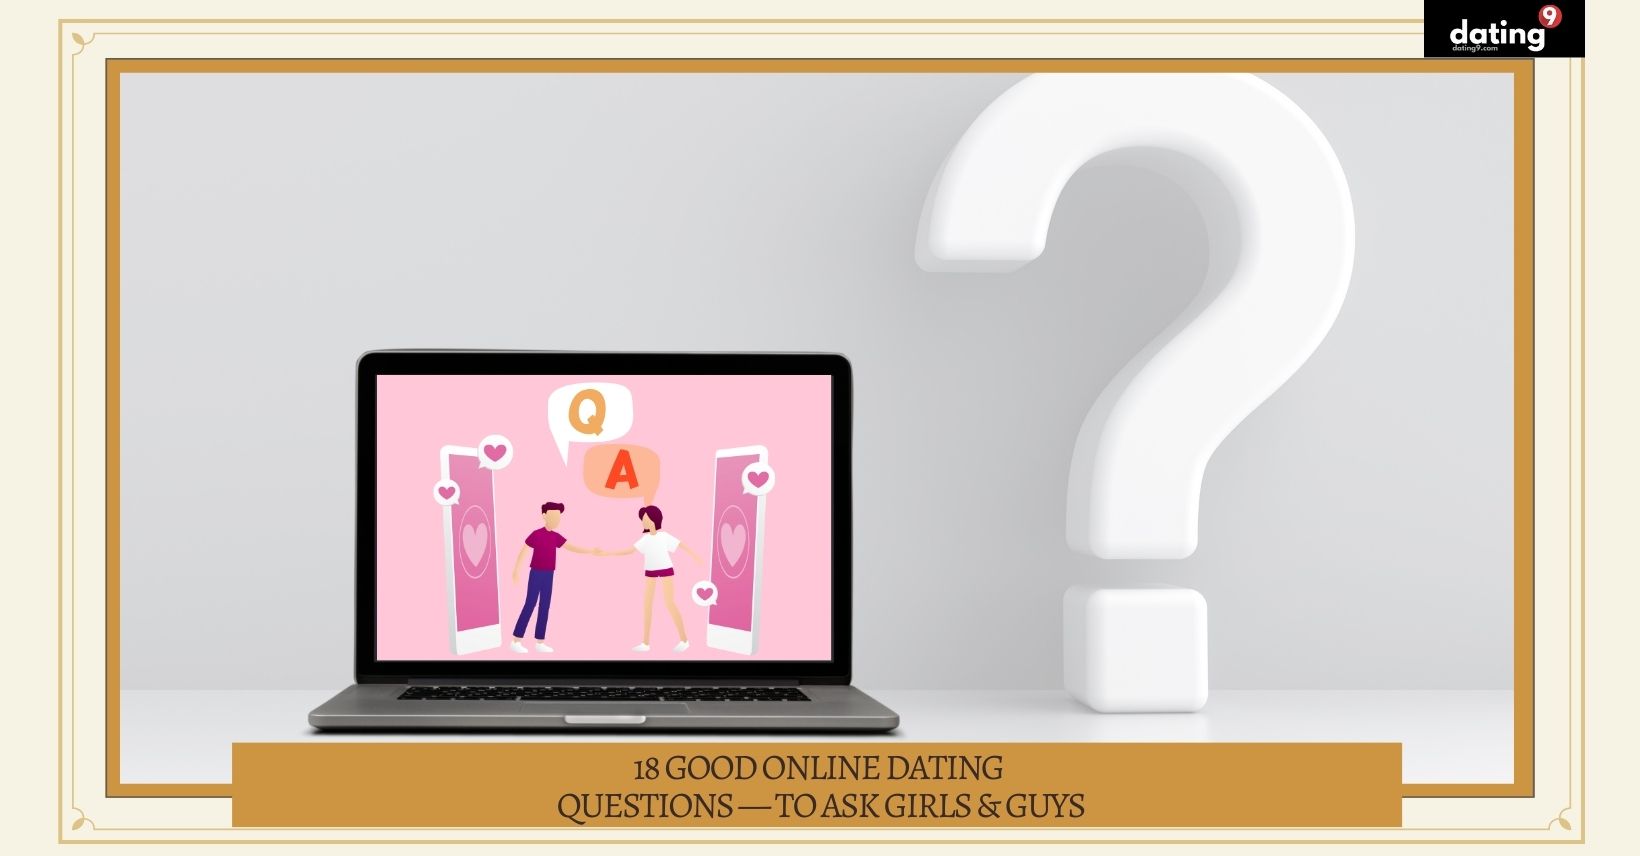 18 Good Online Dating Questions — To Ask Girls & Guys